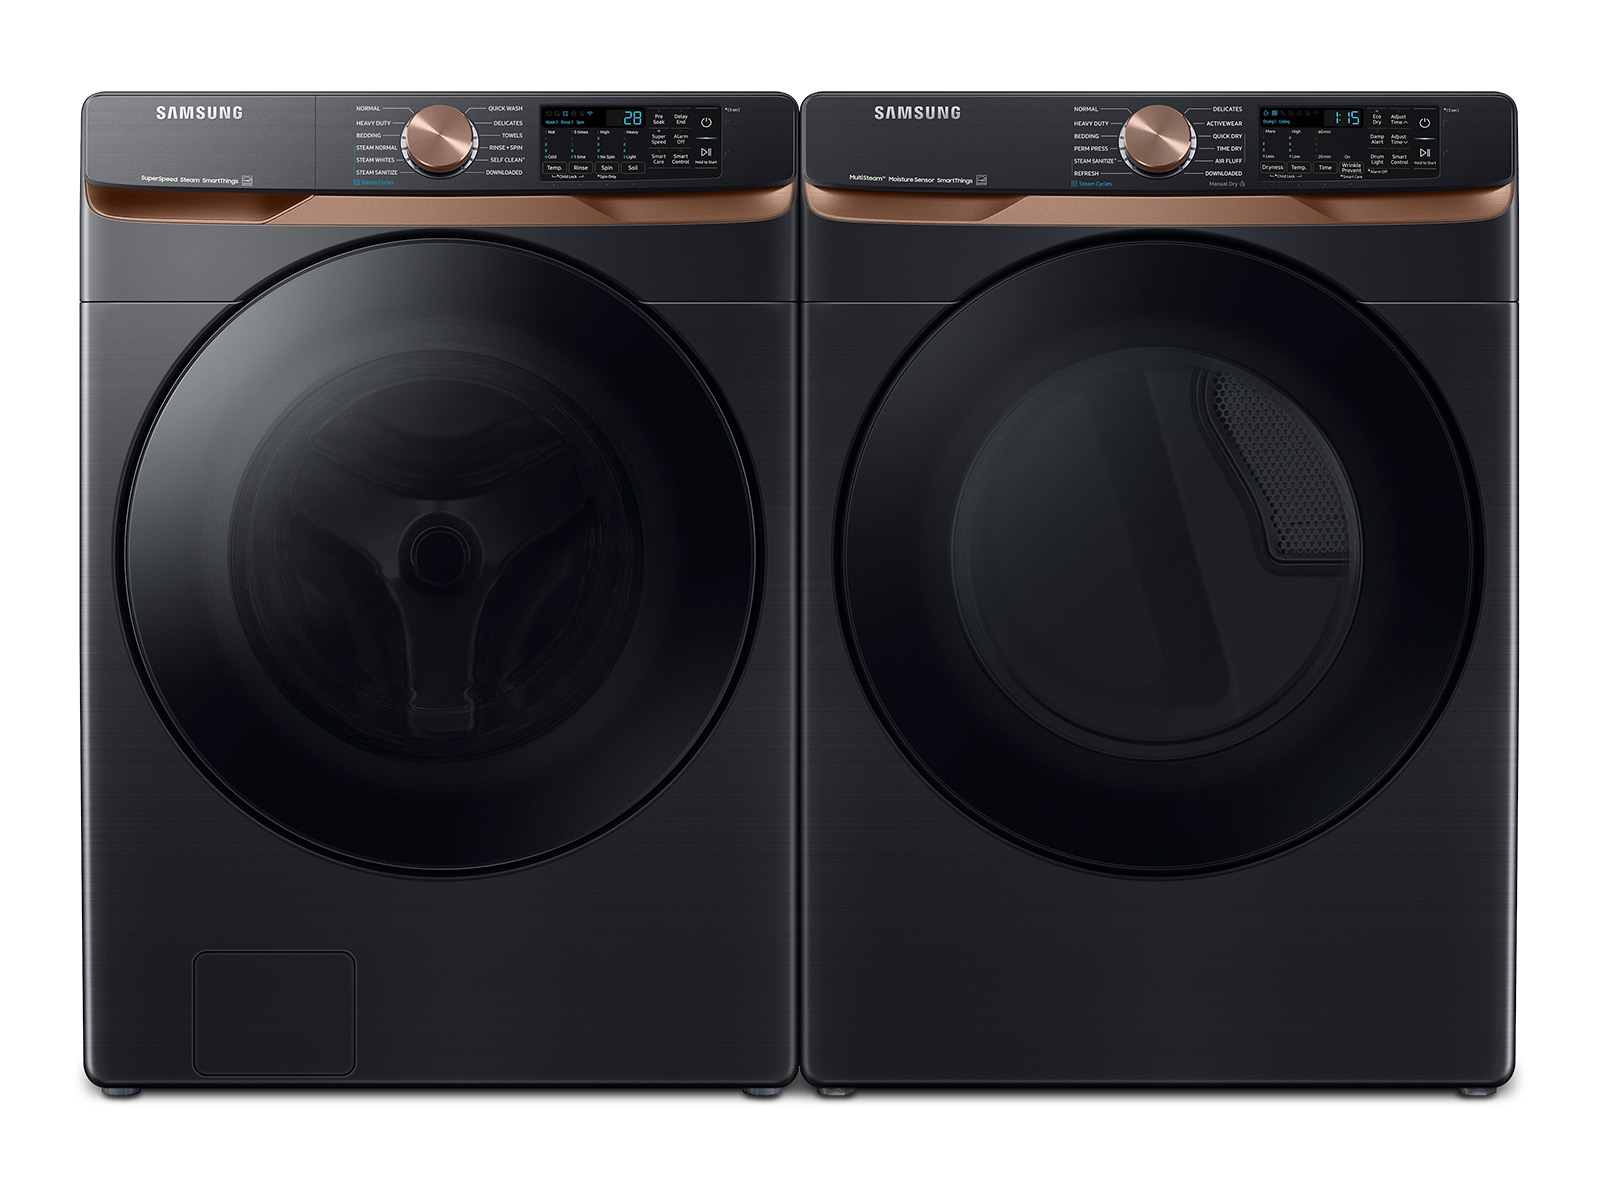 Best Washer and Dryer Deals: Bundles from LG, Samsung & More